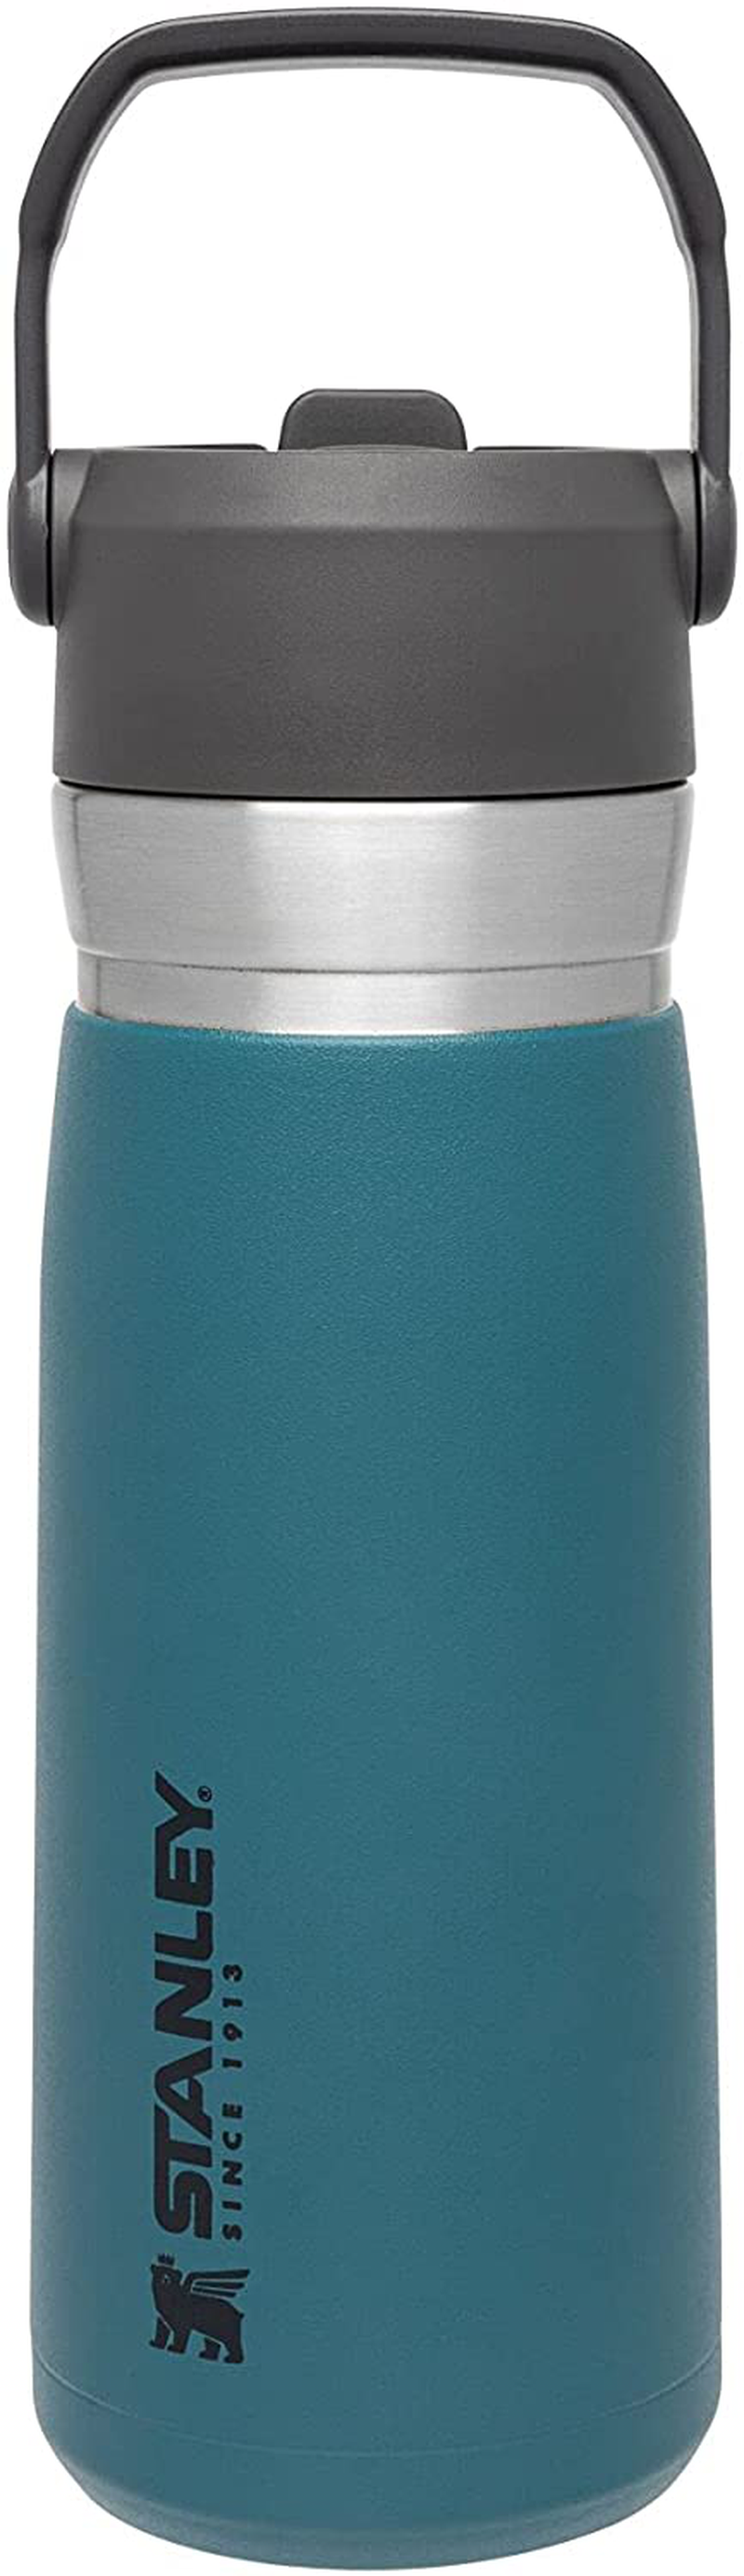 Stanley IceFlow Stainless Steel Bottle with Straw, Vacuum Insulated Water Bottle for Home, Office or Car, Reusable Leakproof Cup with Straw and Handle